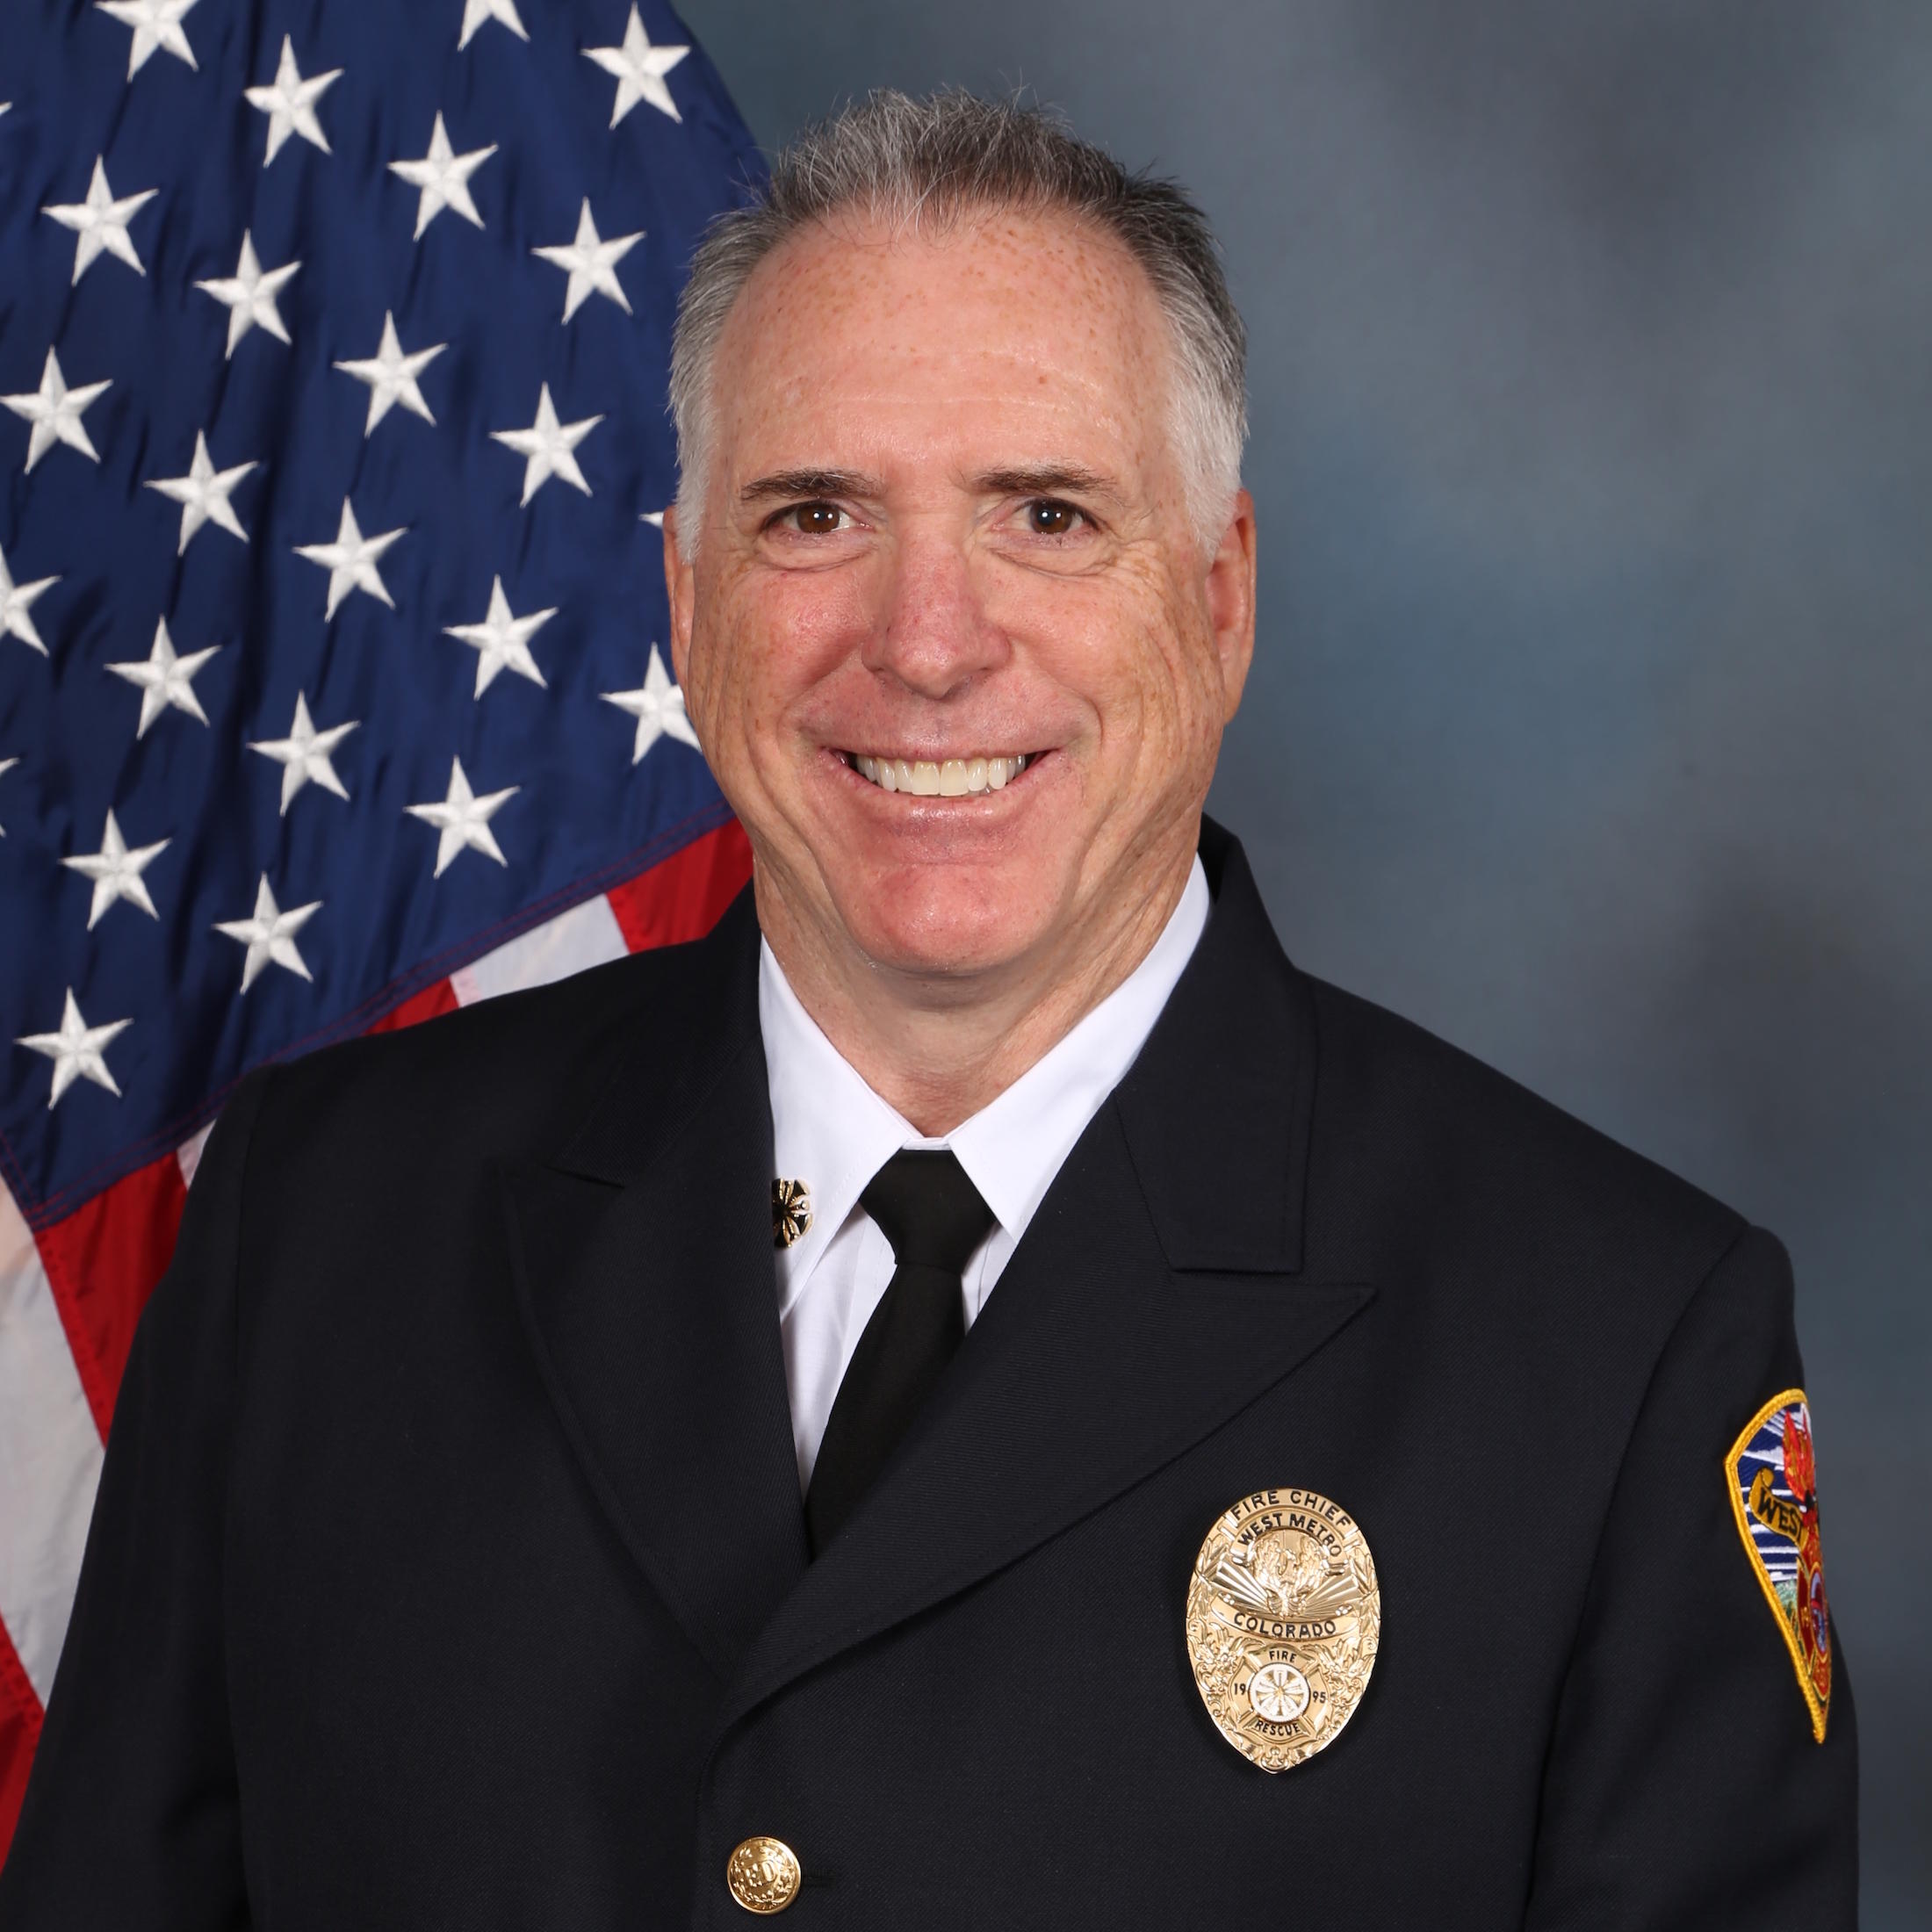 West Metro Fire Chief Don Lombardi